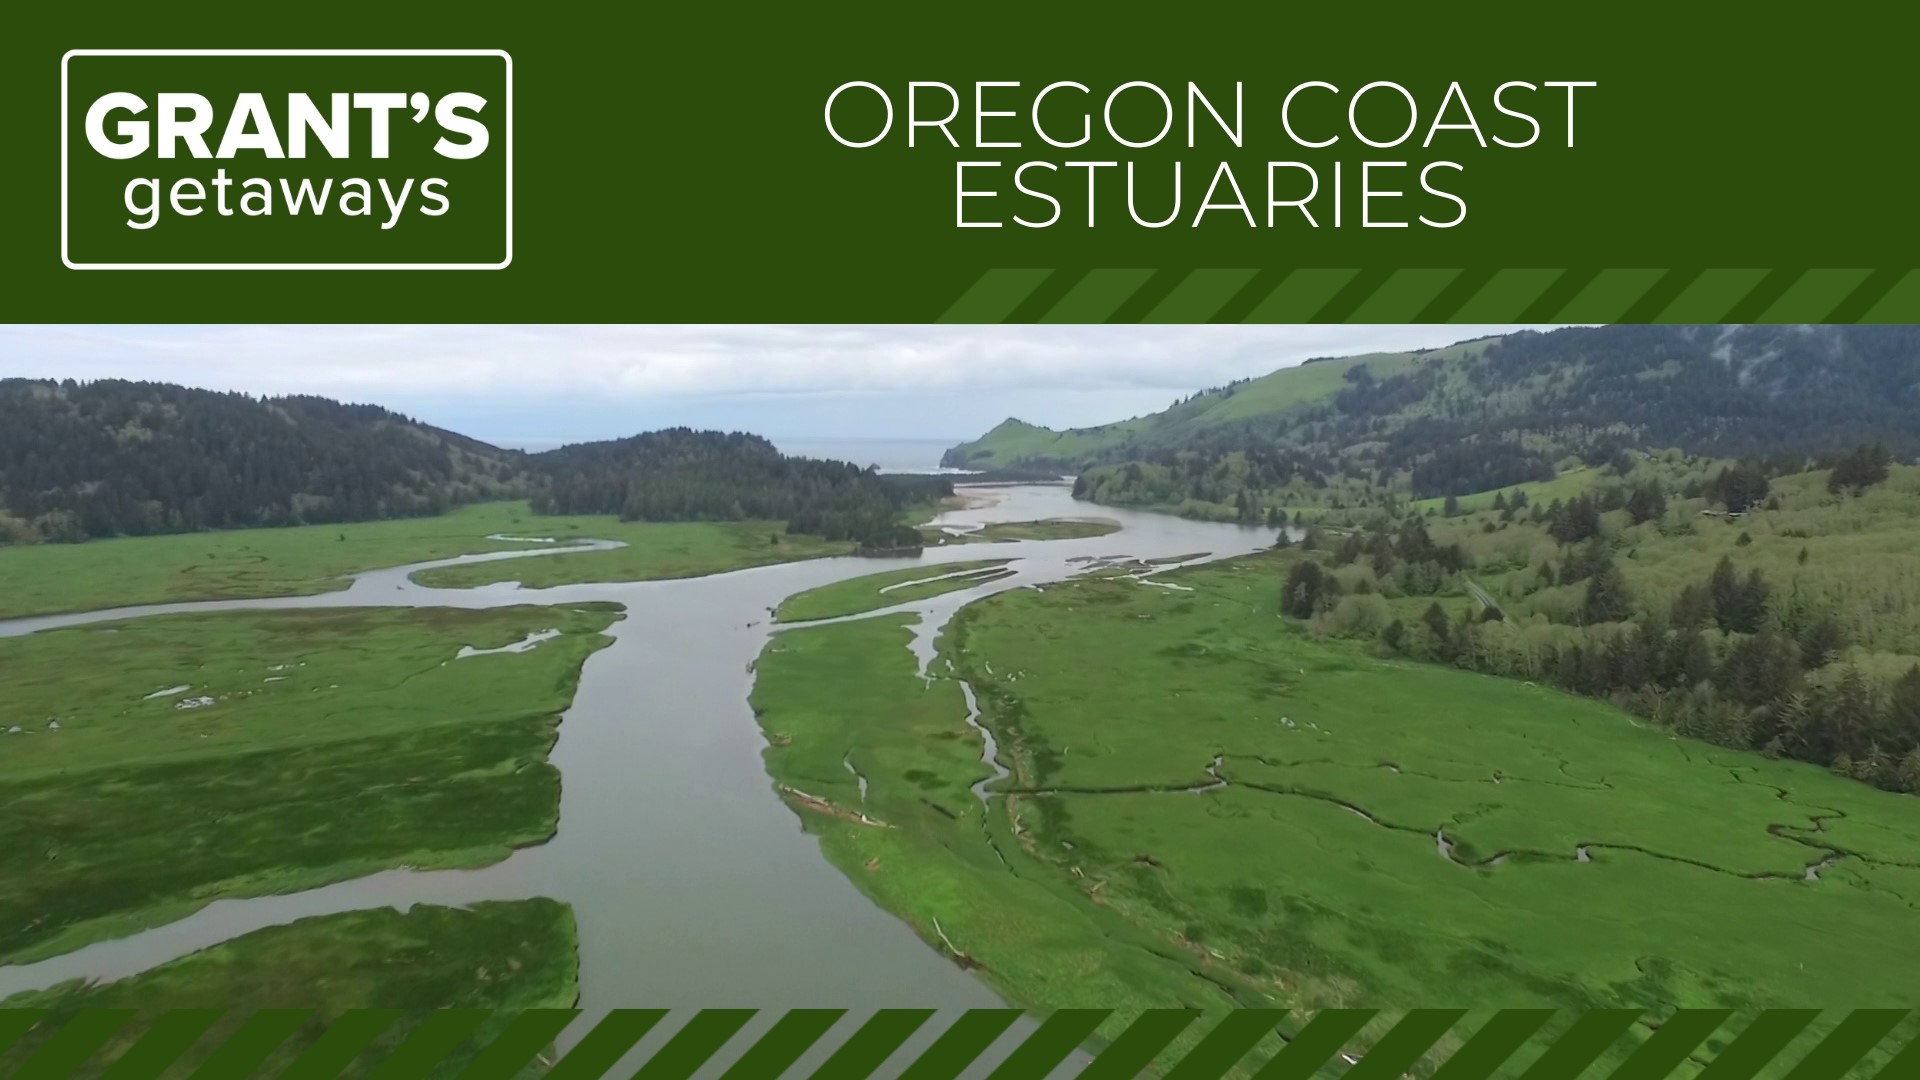 Grant McOmie visited the North Oregon Coast to explore two estuaries with spectacular views.